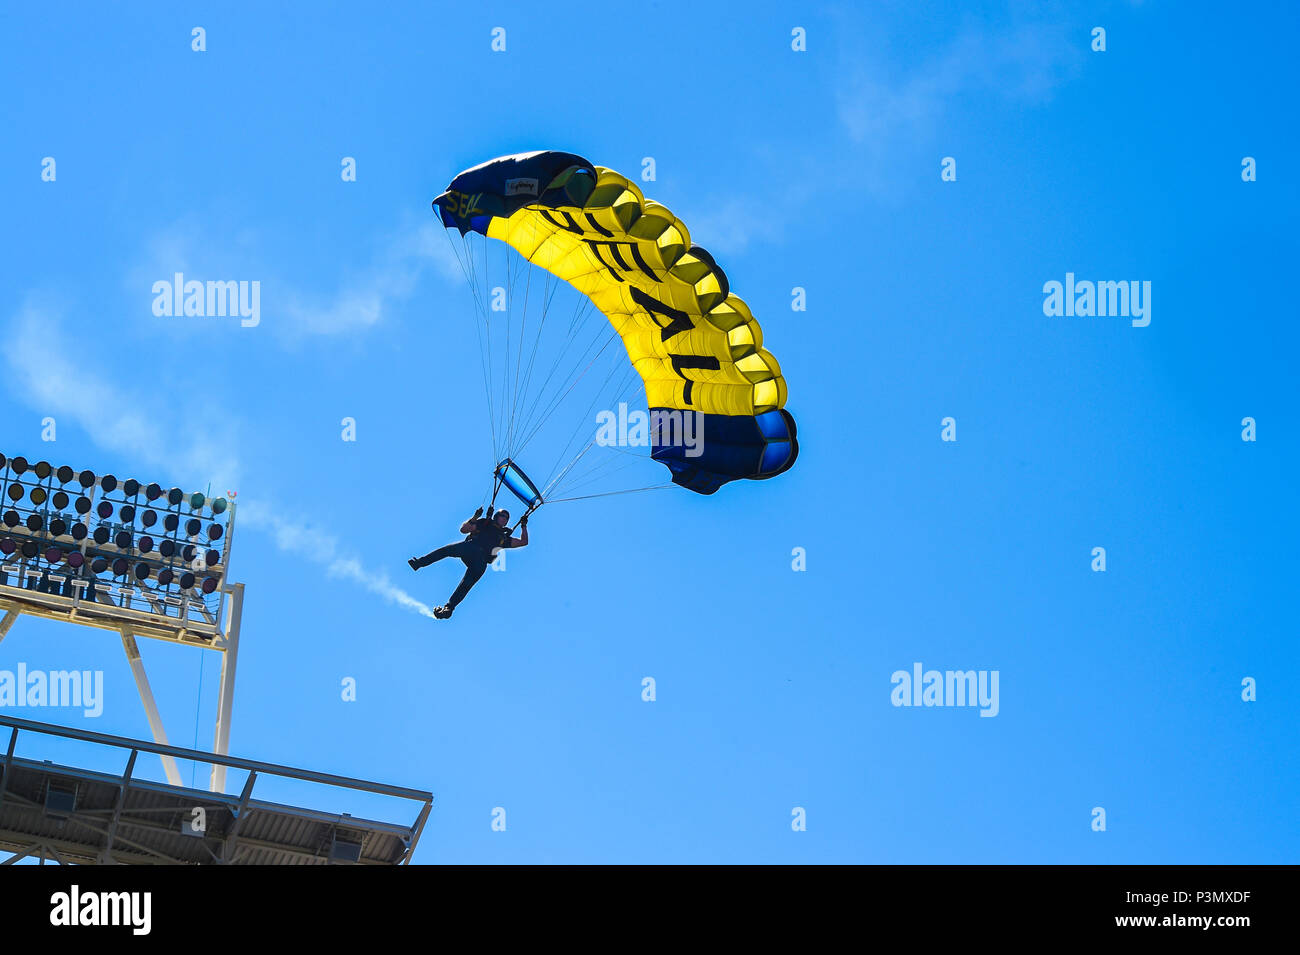 160710-N-VY375-013 SAN DIEGO (July 10, 2016) – Lt. (SEAL) Duncan Hamilton, member of the U.S. Navy Parachute Team, the Leap Frogs, prepares to land during a demonstration at the Major League Baseball All-Star Futures Game above Petco Park. The Navy Parachute Team is based in San Diego and performs aerial parachute demonstrations around the nation in support of Naval Special Warfare and Navy recruiting. (U.S. Navy photo by Special Operator 1st Class Remington Peters/Released) Stock Photo